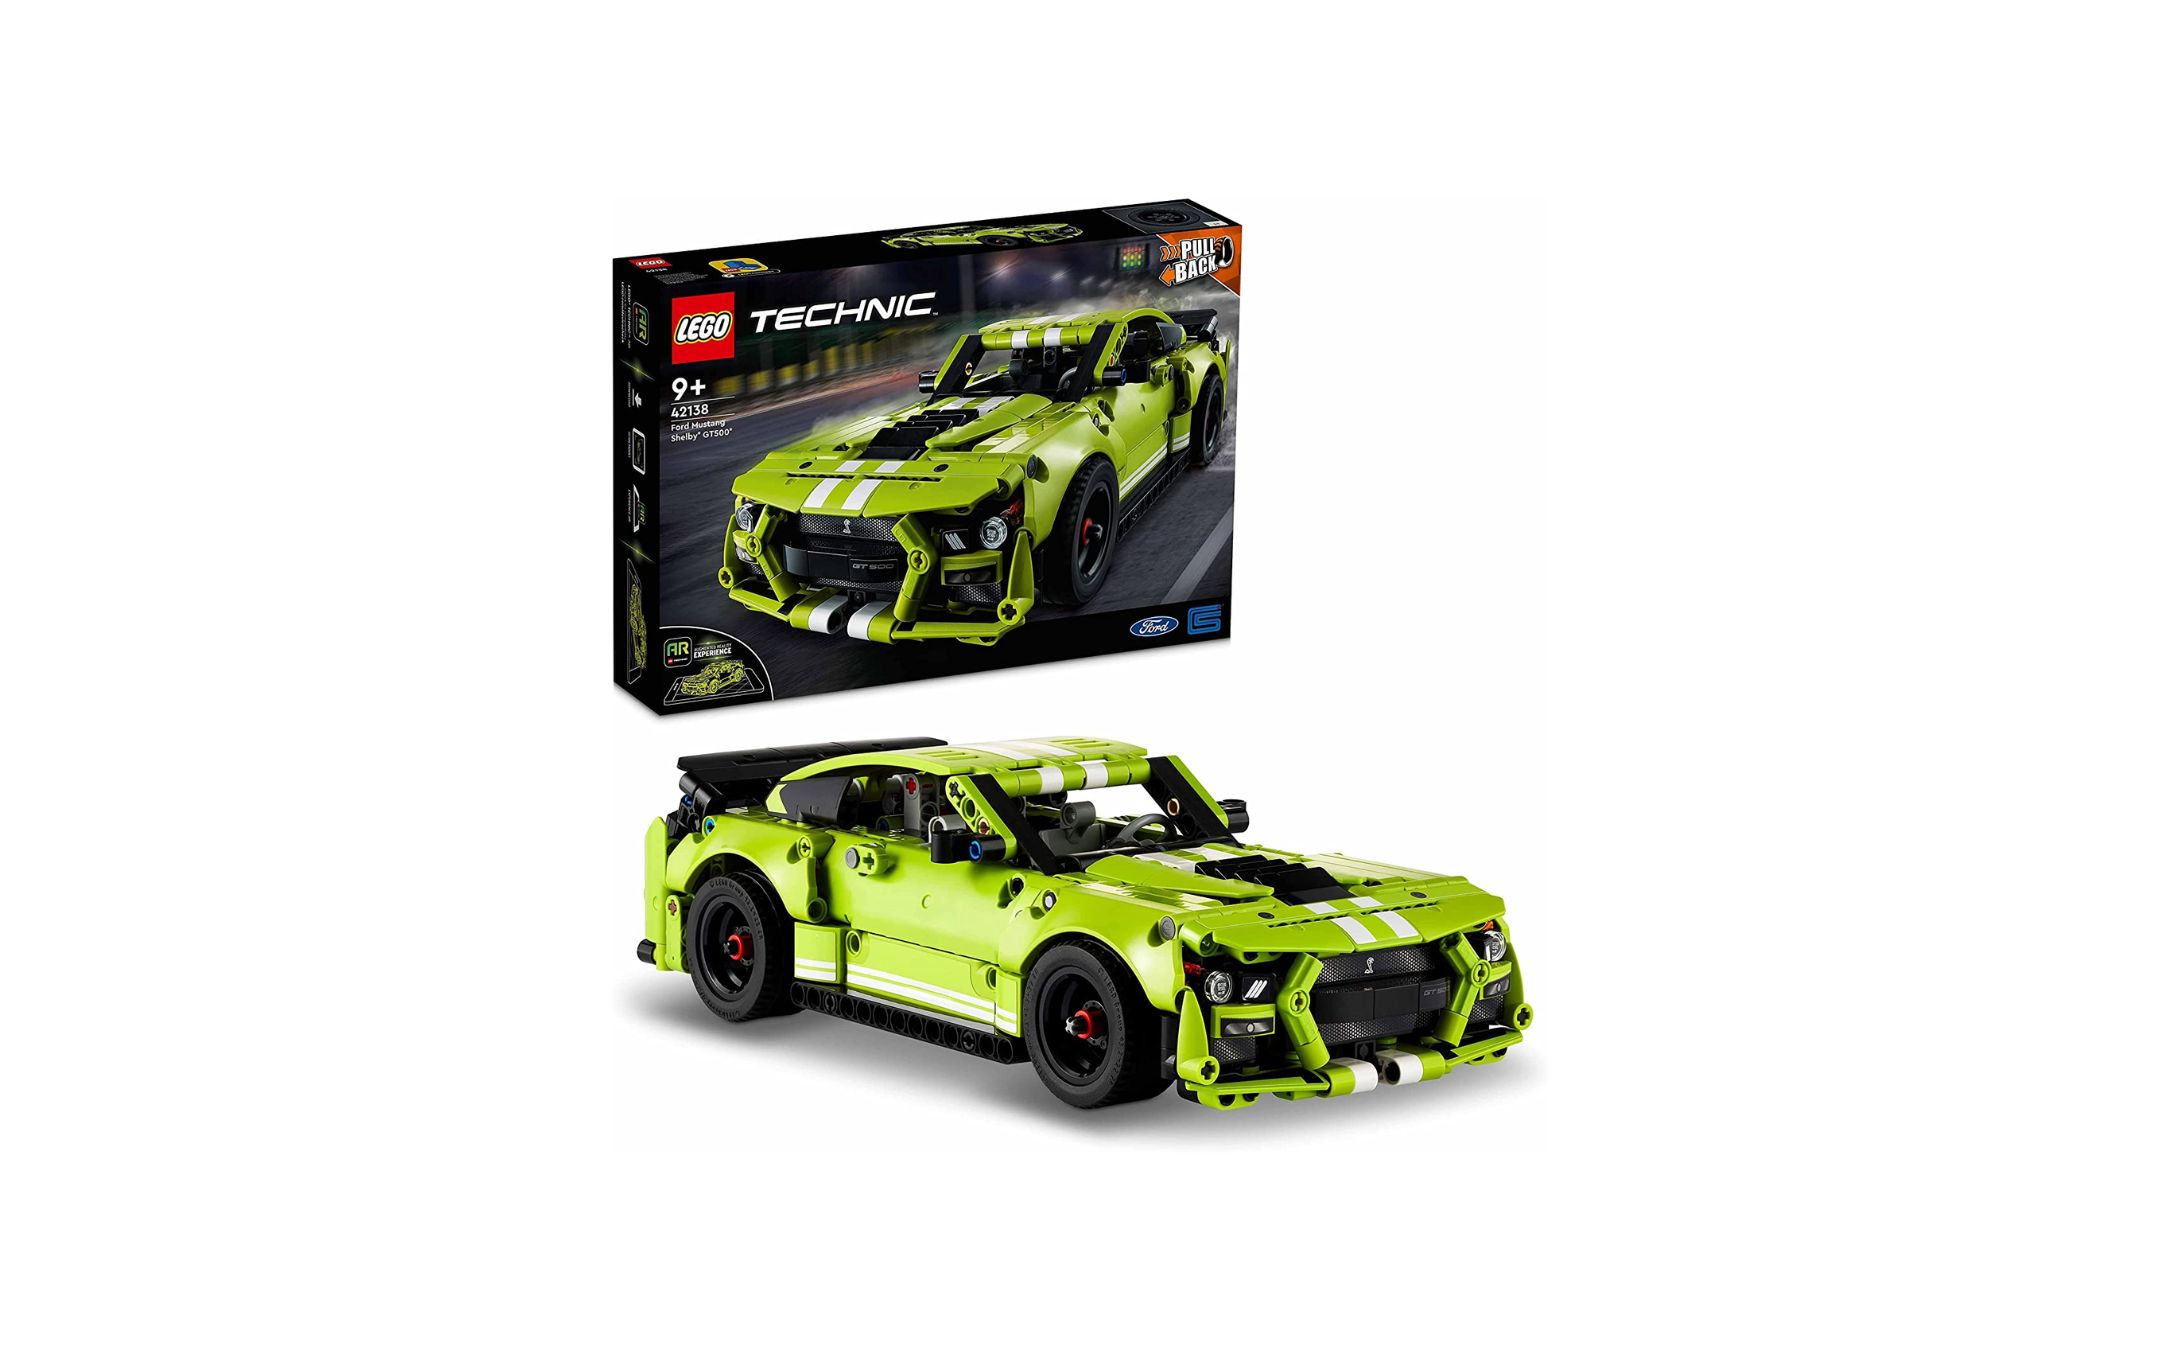 LEGO Technic Ford Mustang Shelby in OFFERTA